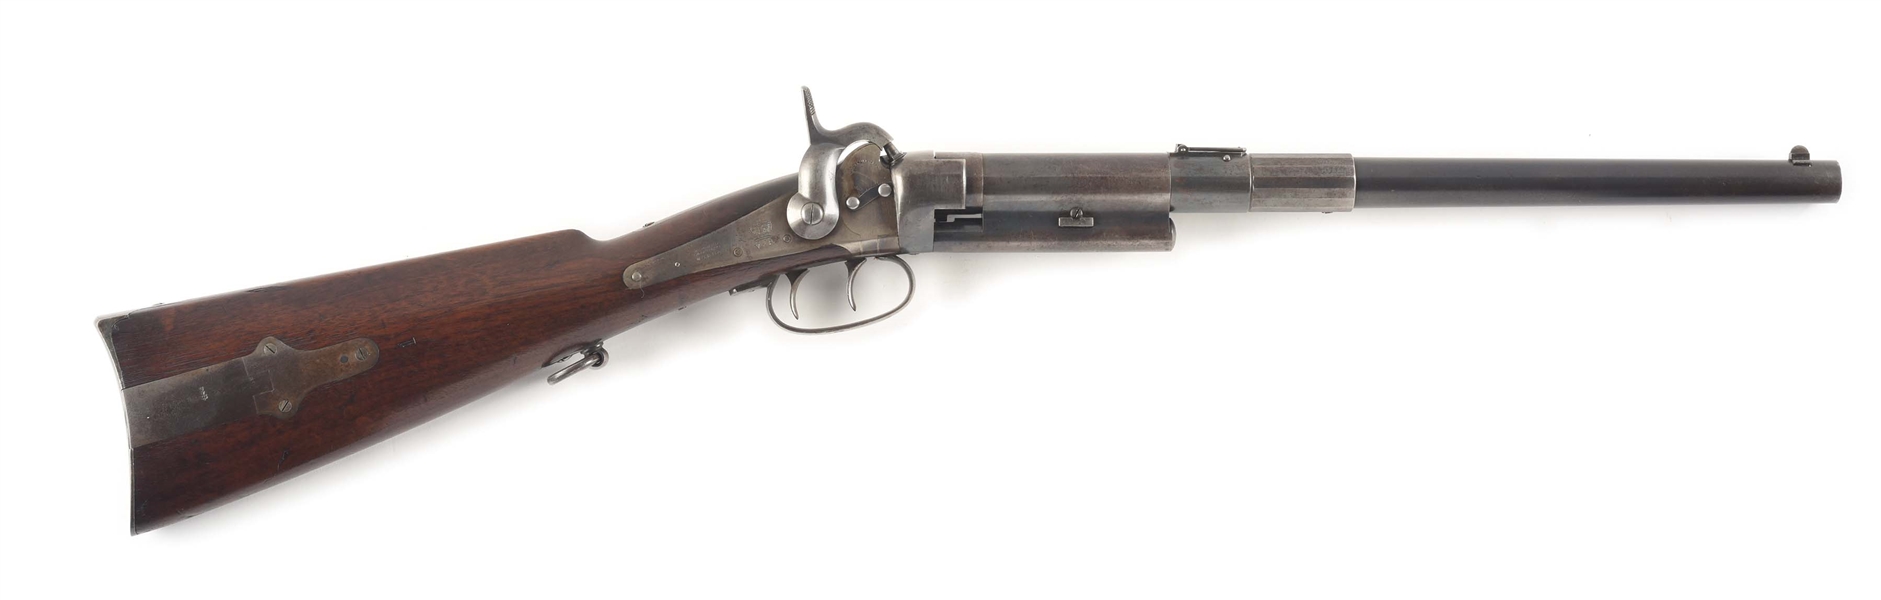 (A) GREENE BRITISH TYPE CARBINE BY MASSACHUSETTS ARMS CO.